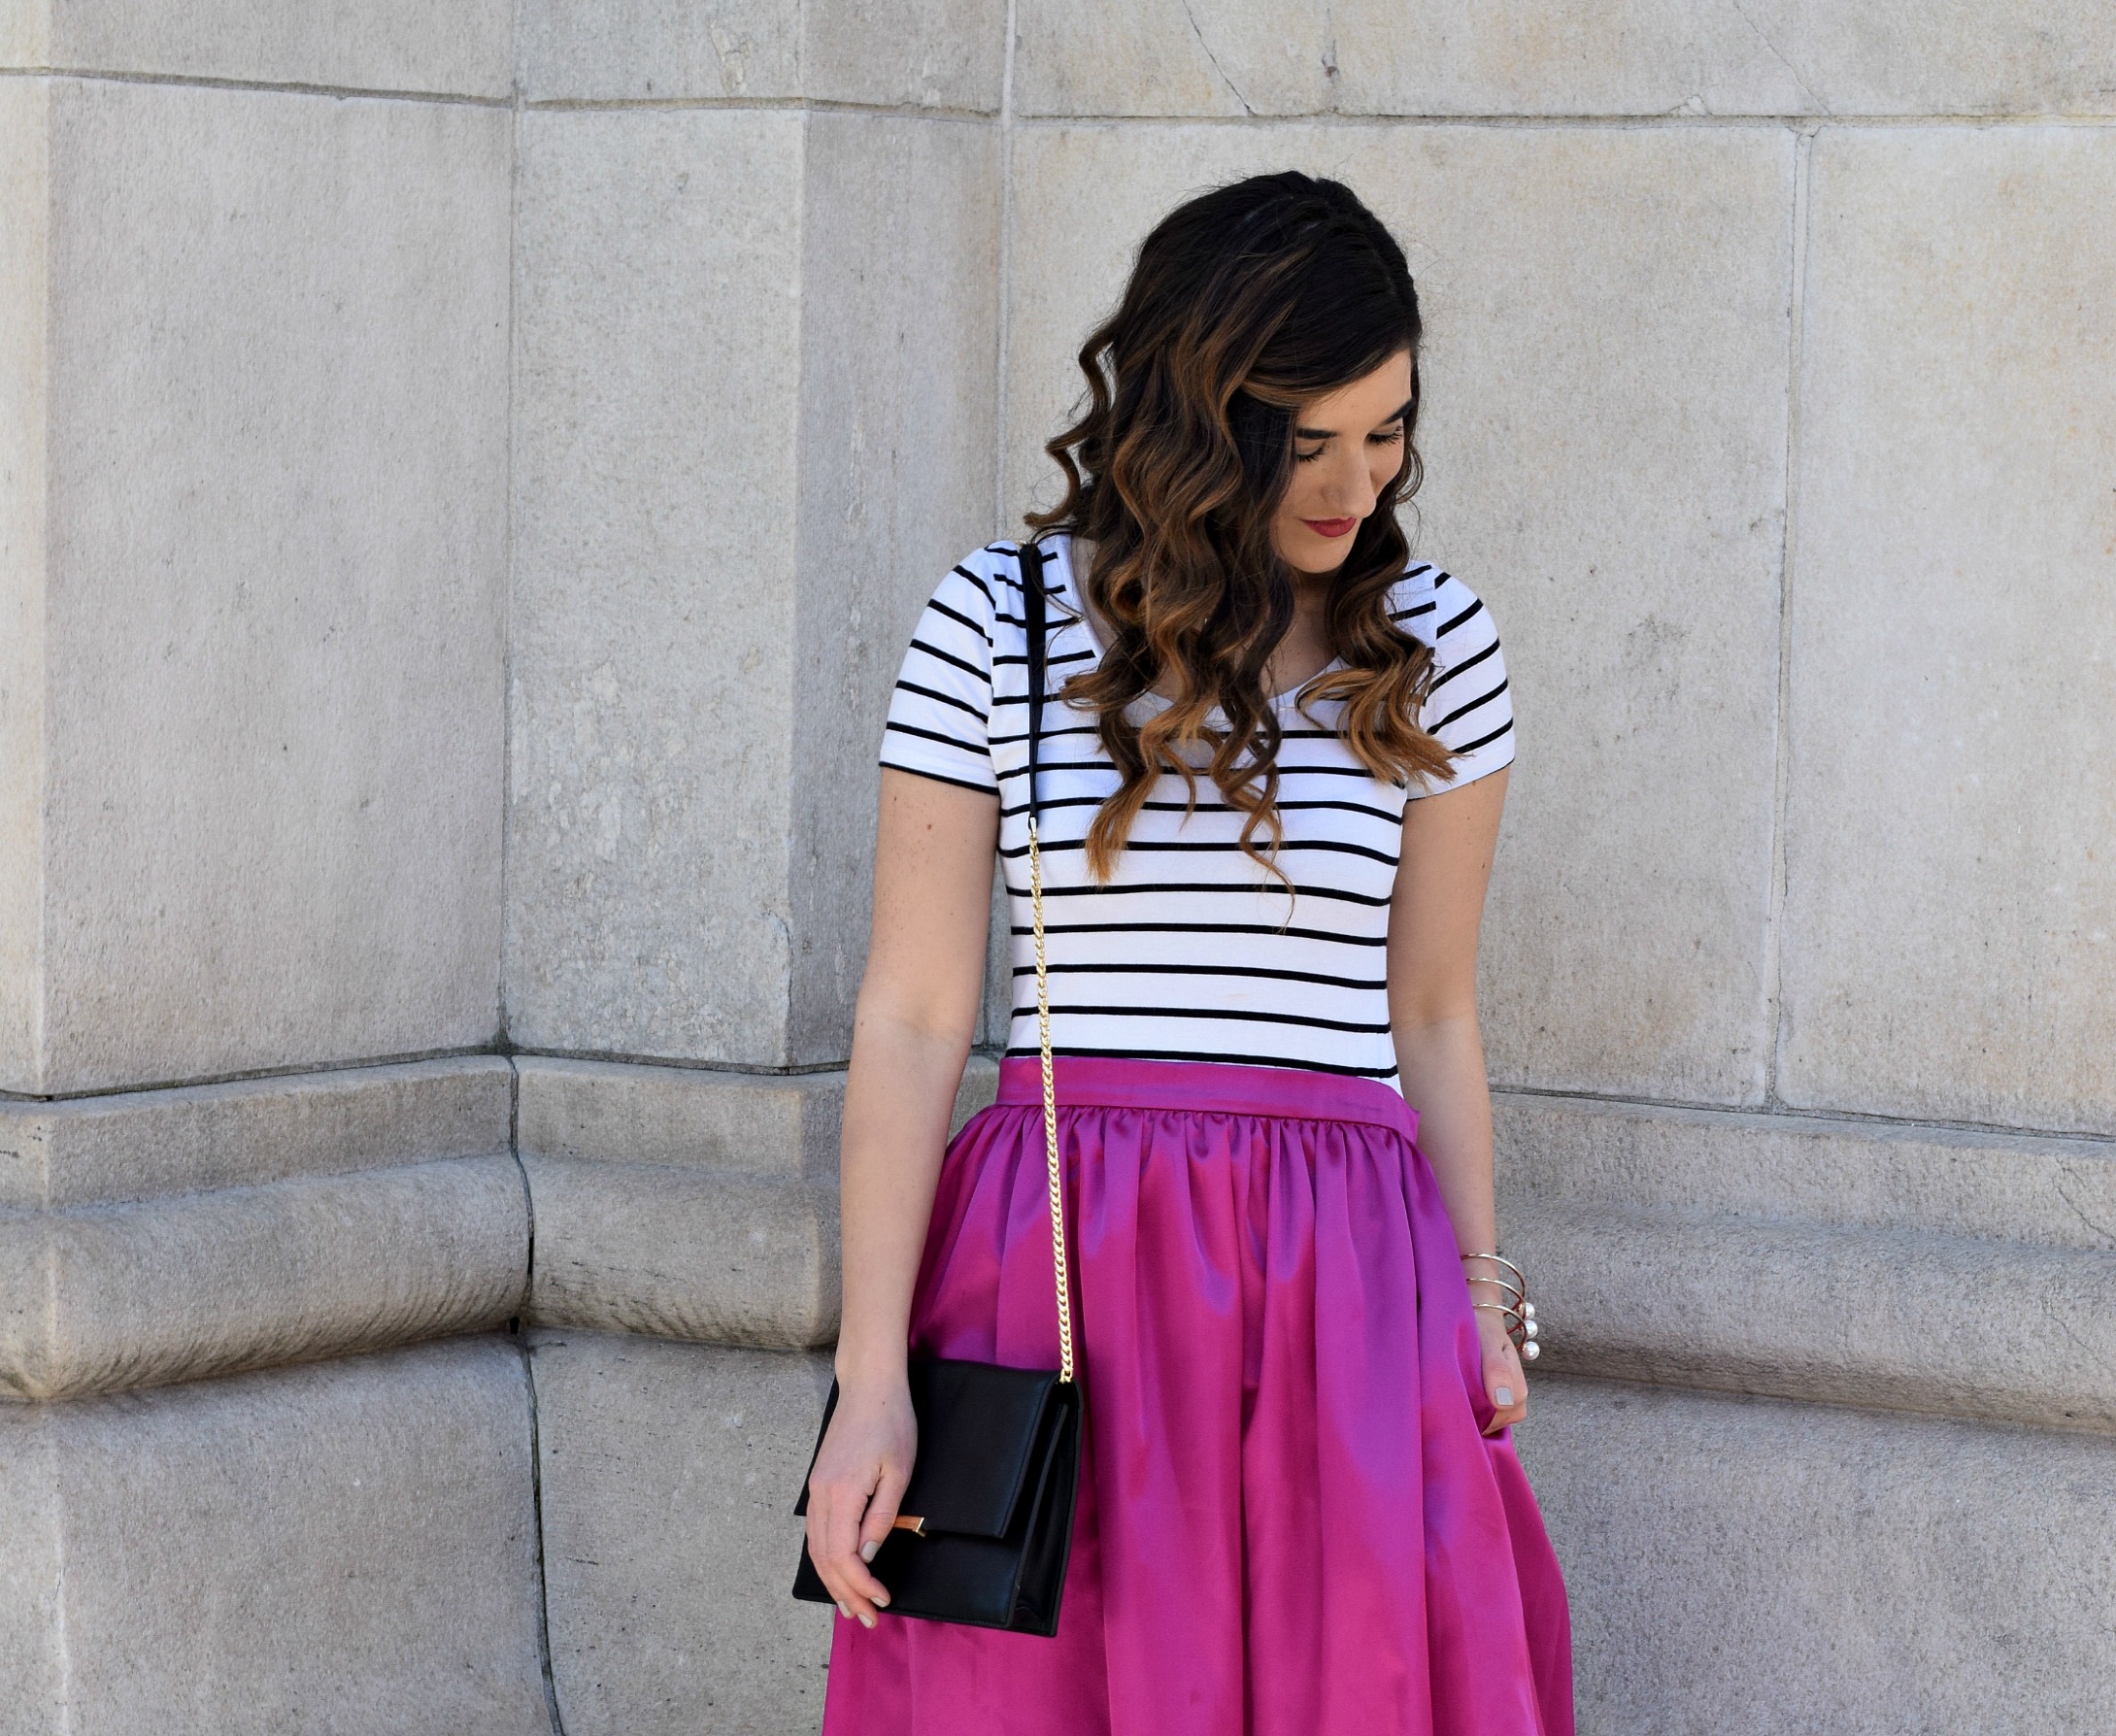 Fuchsia Party Skirt More Than Just Figleaves Louboutins & Love Fashion Blog Esther Santer NYC Street Style Blogger Outfit OOTD Midi Photoshoot Girl Women Striped Tee Ivanka Trump Black Purse Gold Jewelry Choker Bracelet Nude Heels Shoes Steve Madden.jpg